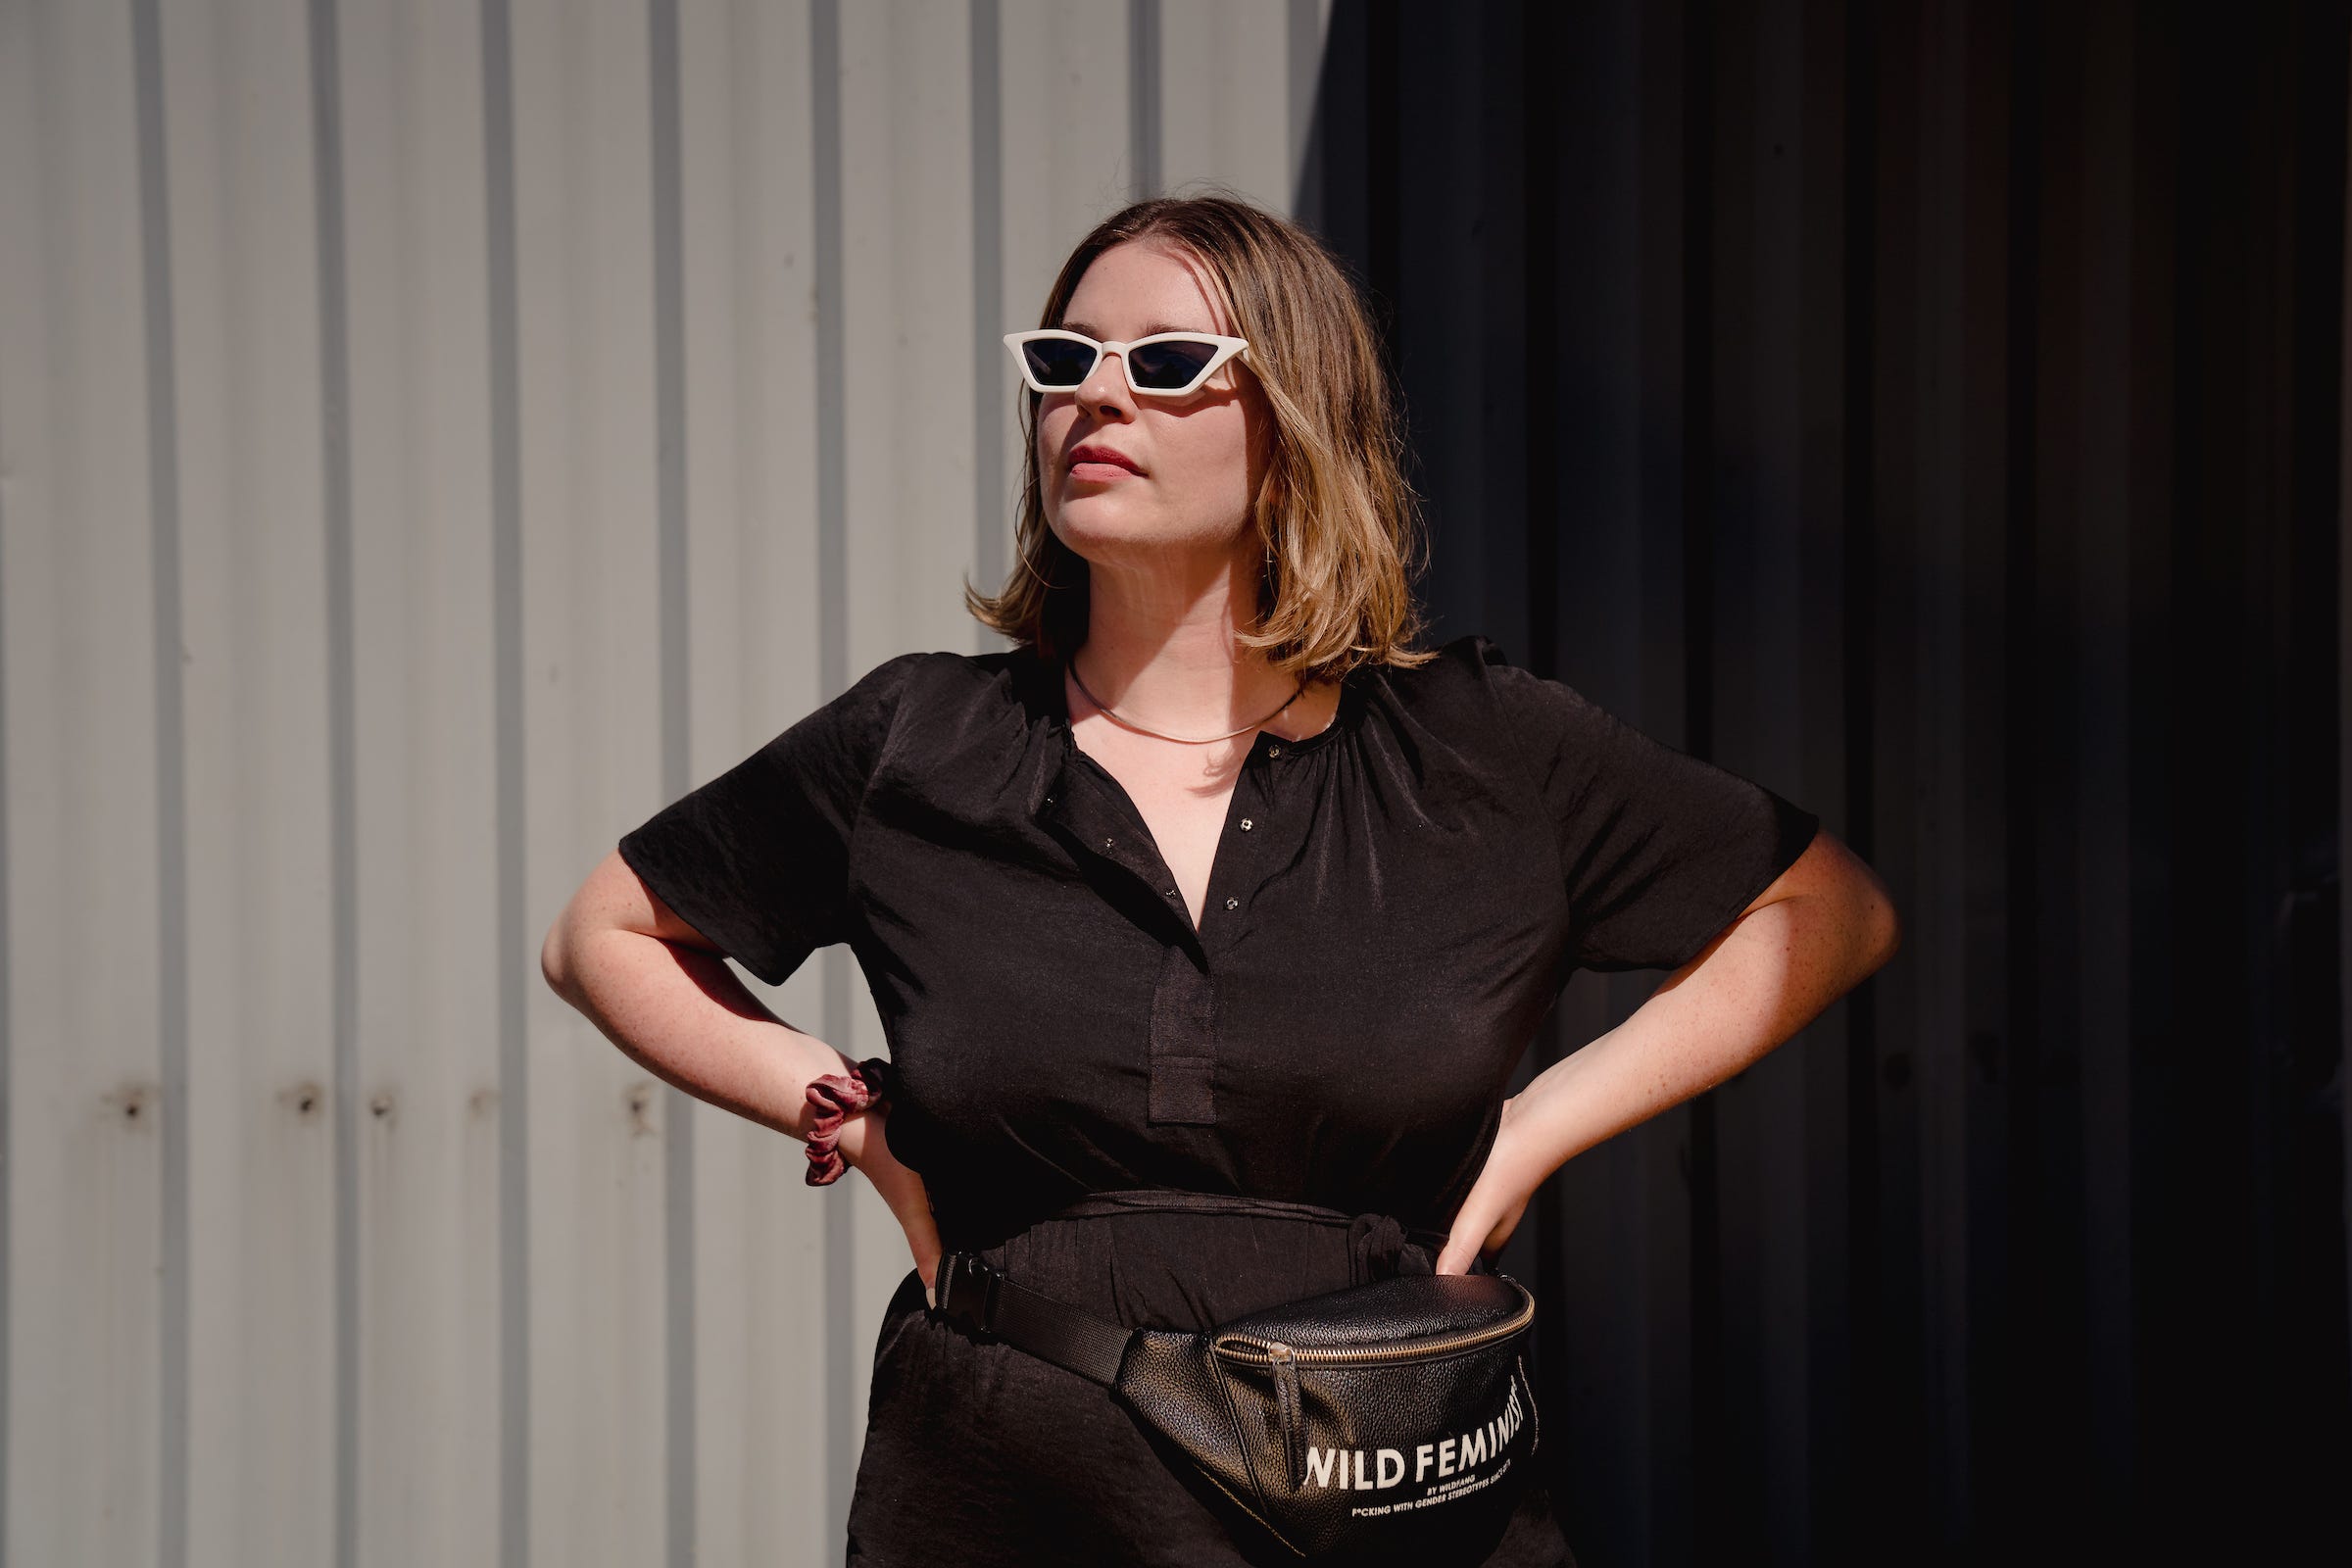 Tori Dunlap wearing a black short-sleeve dress with a necklace, a pair of white sunglasses, and a fanny pack that says "Wild Feminist."